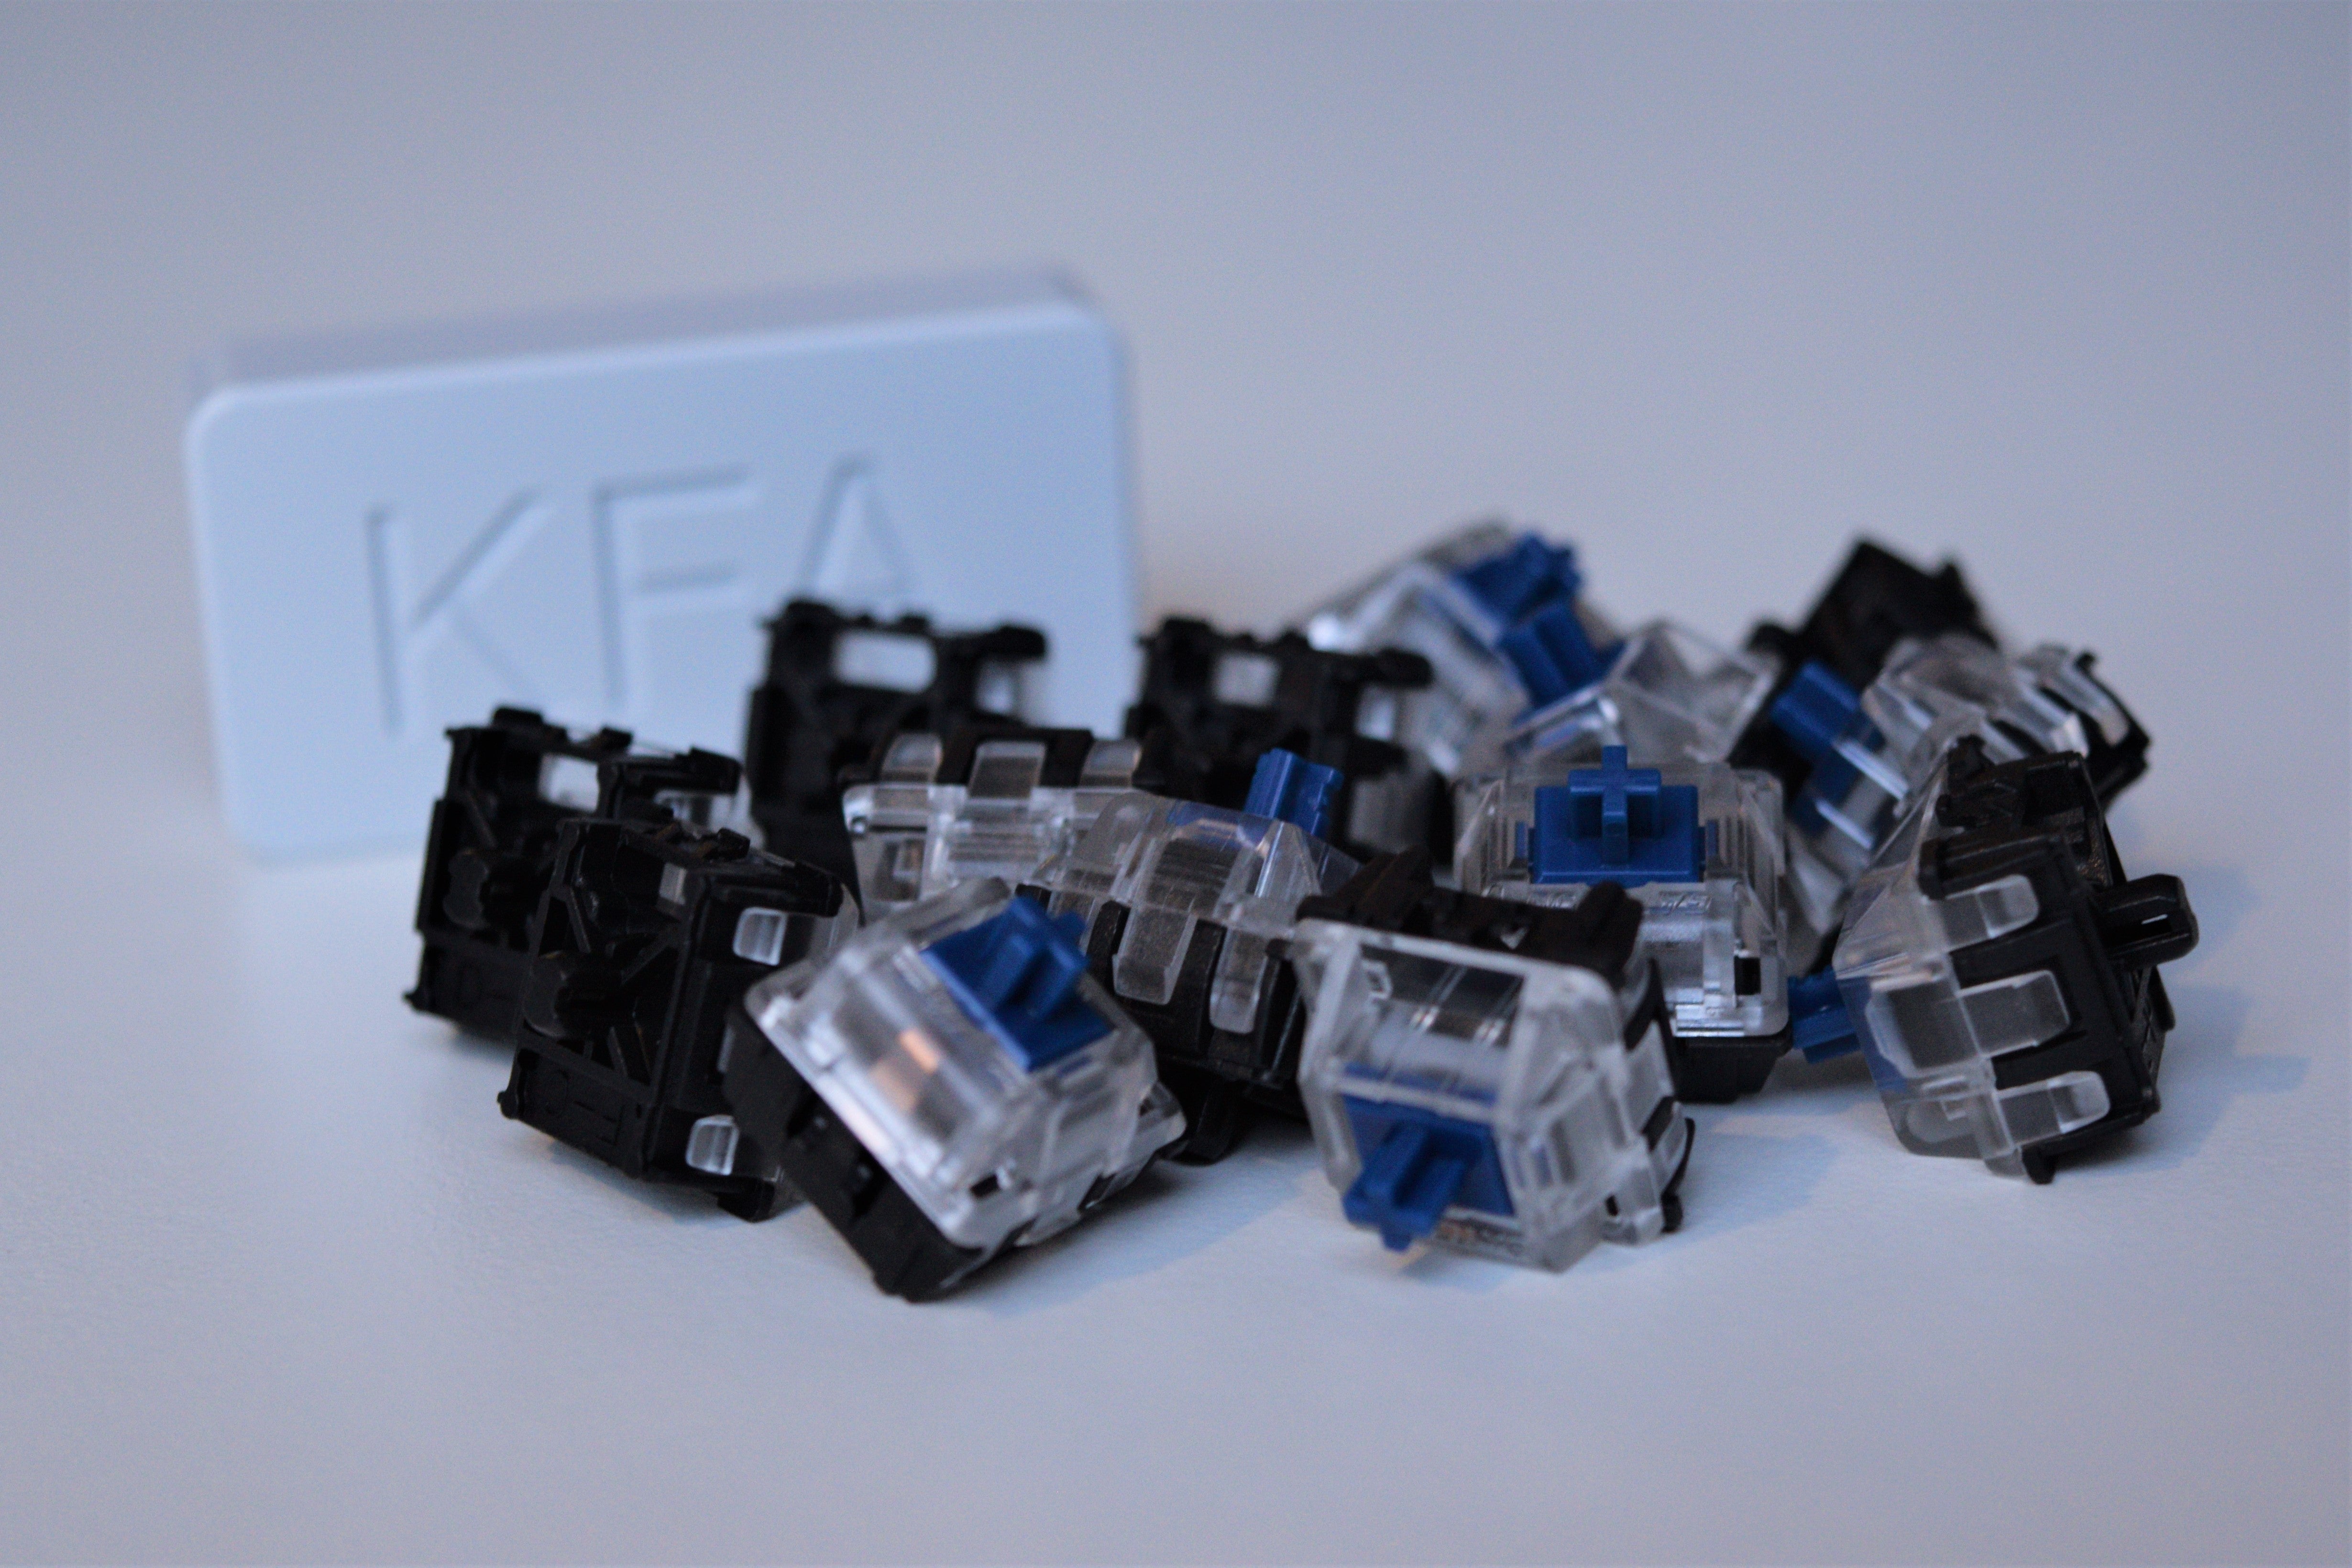 Gateron Optical Blue Group View with KFA branding out of focus